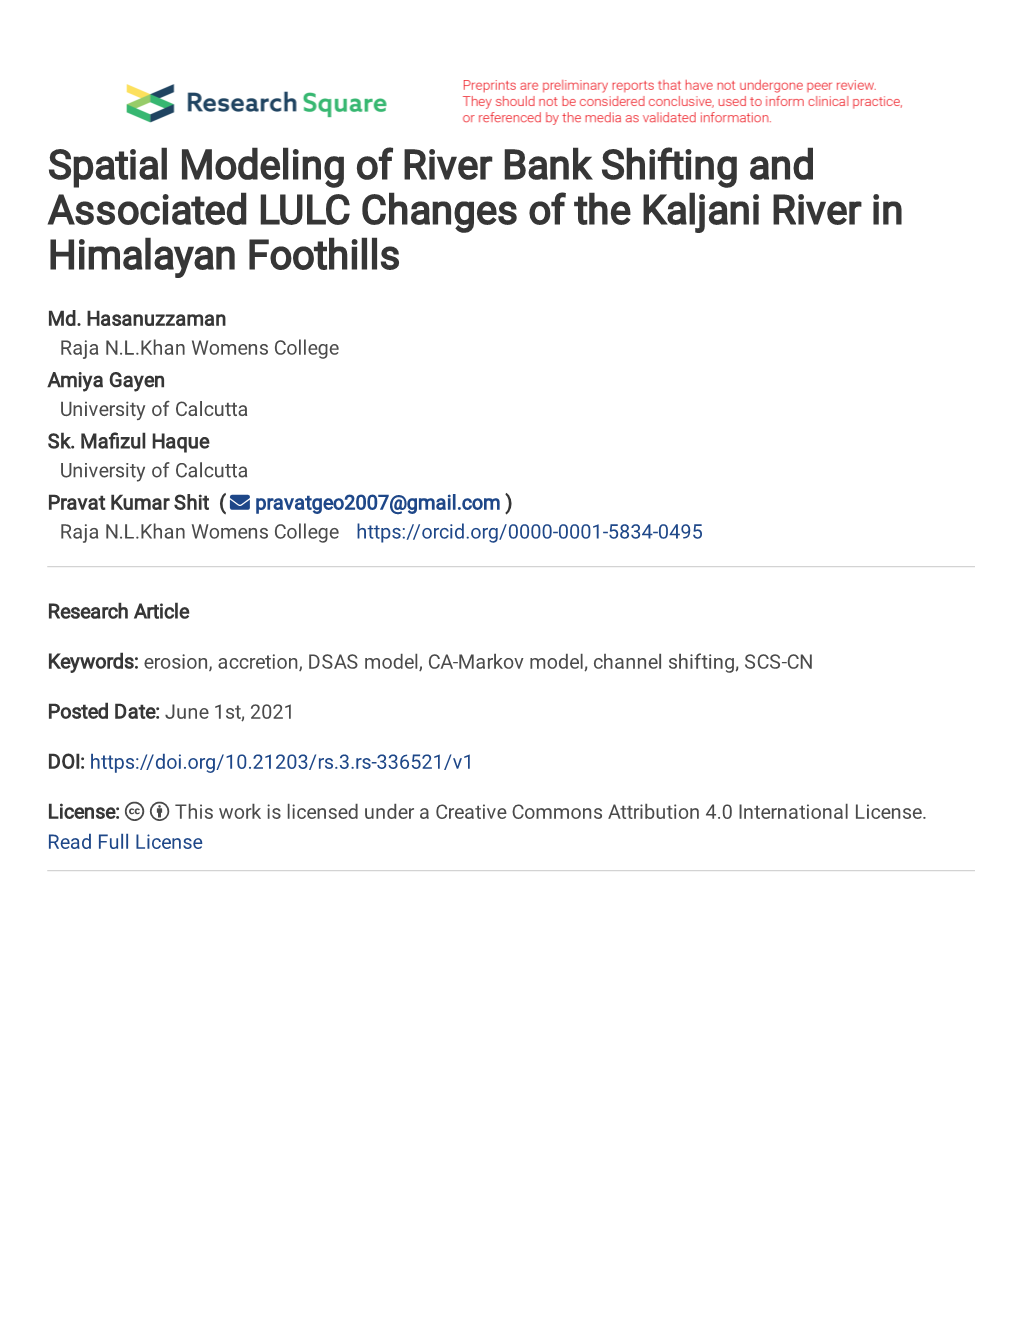 Spatial Modeling of River Bank Shifting and Associated LULC Changes of the Kaljani River in Himalayan Foothills